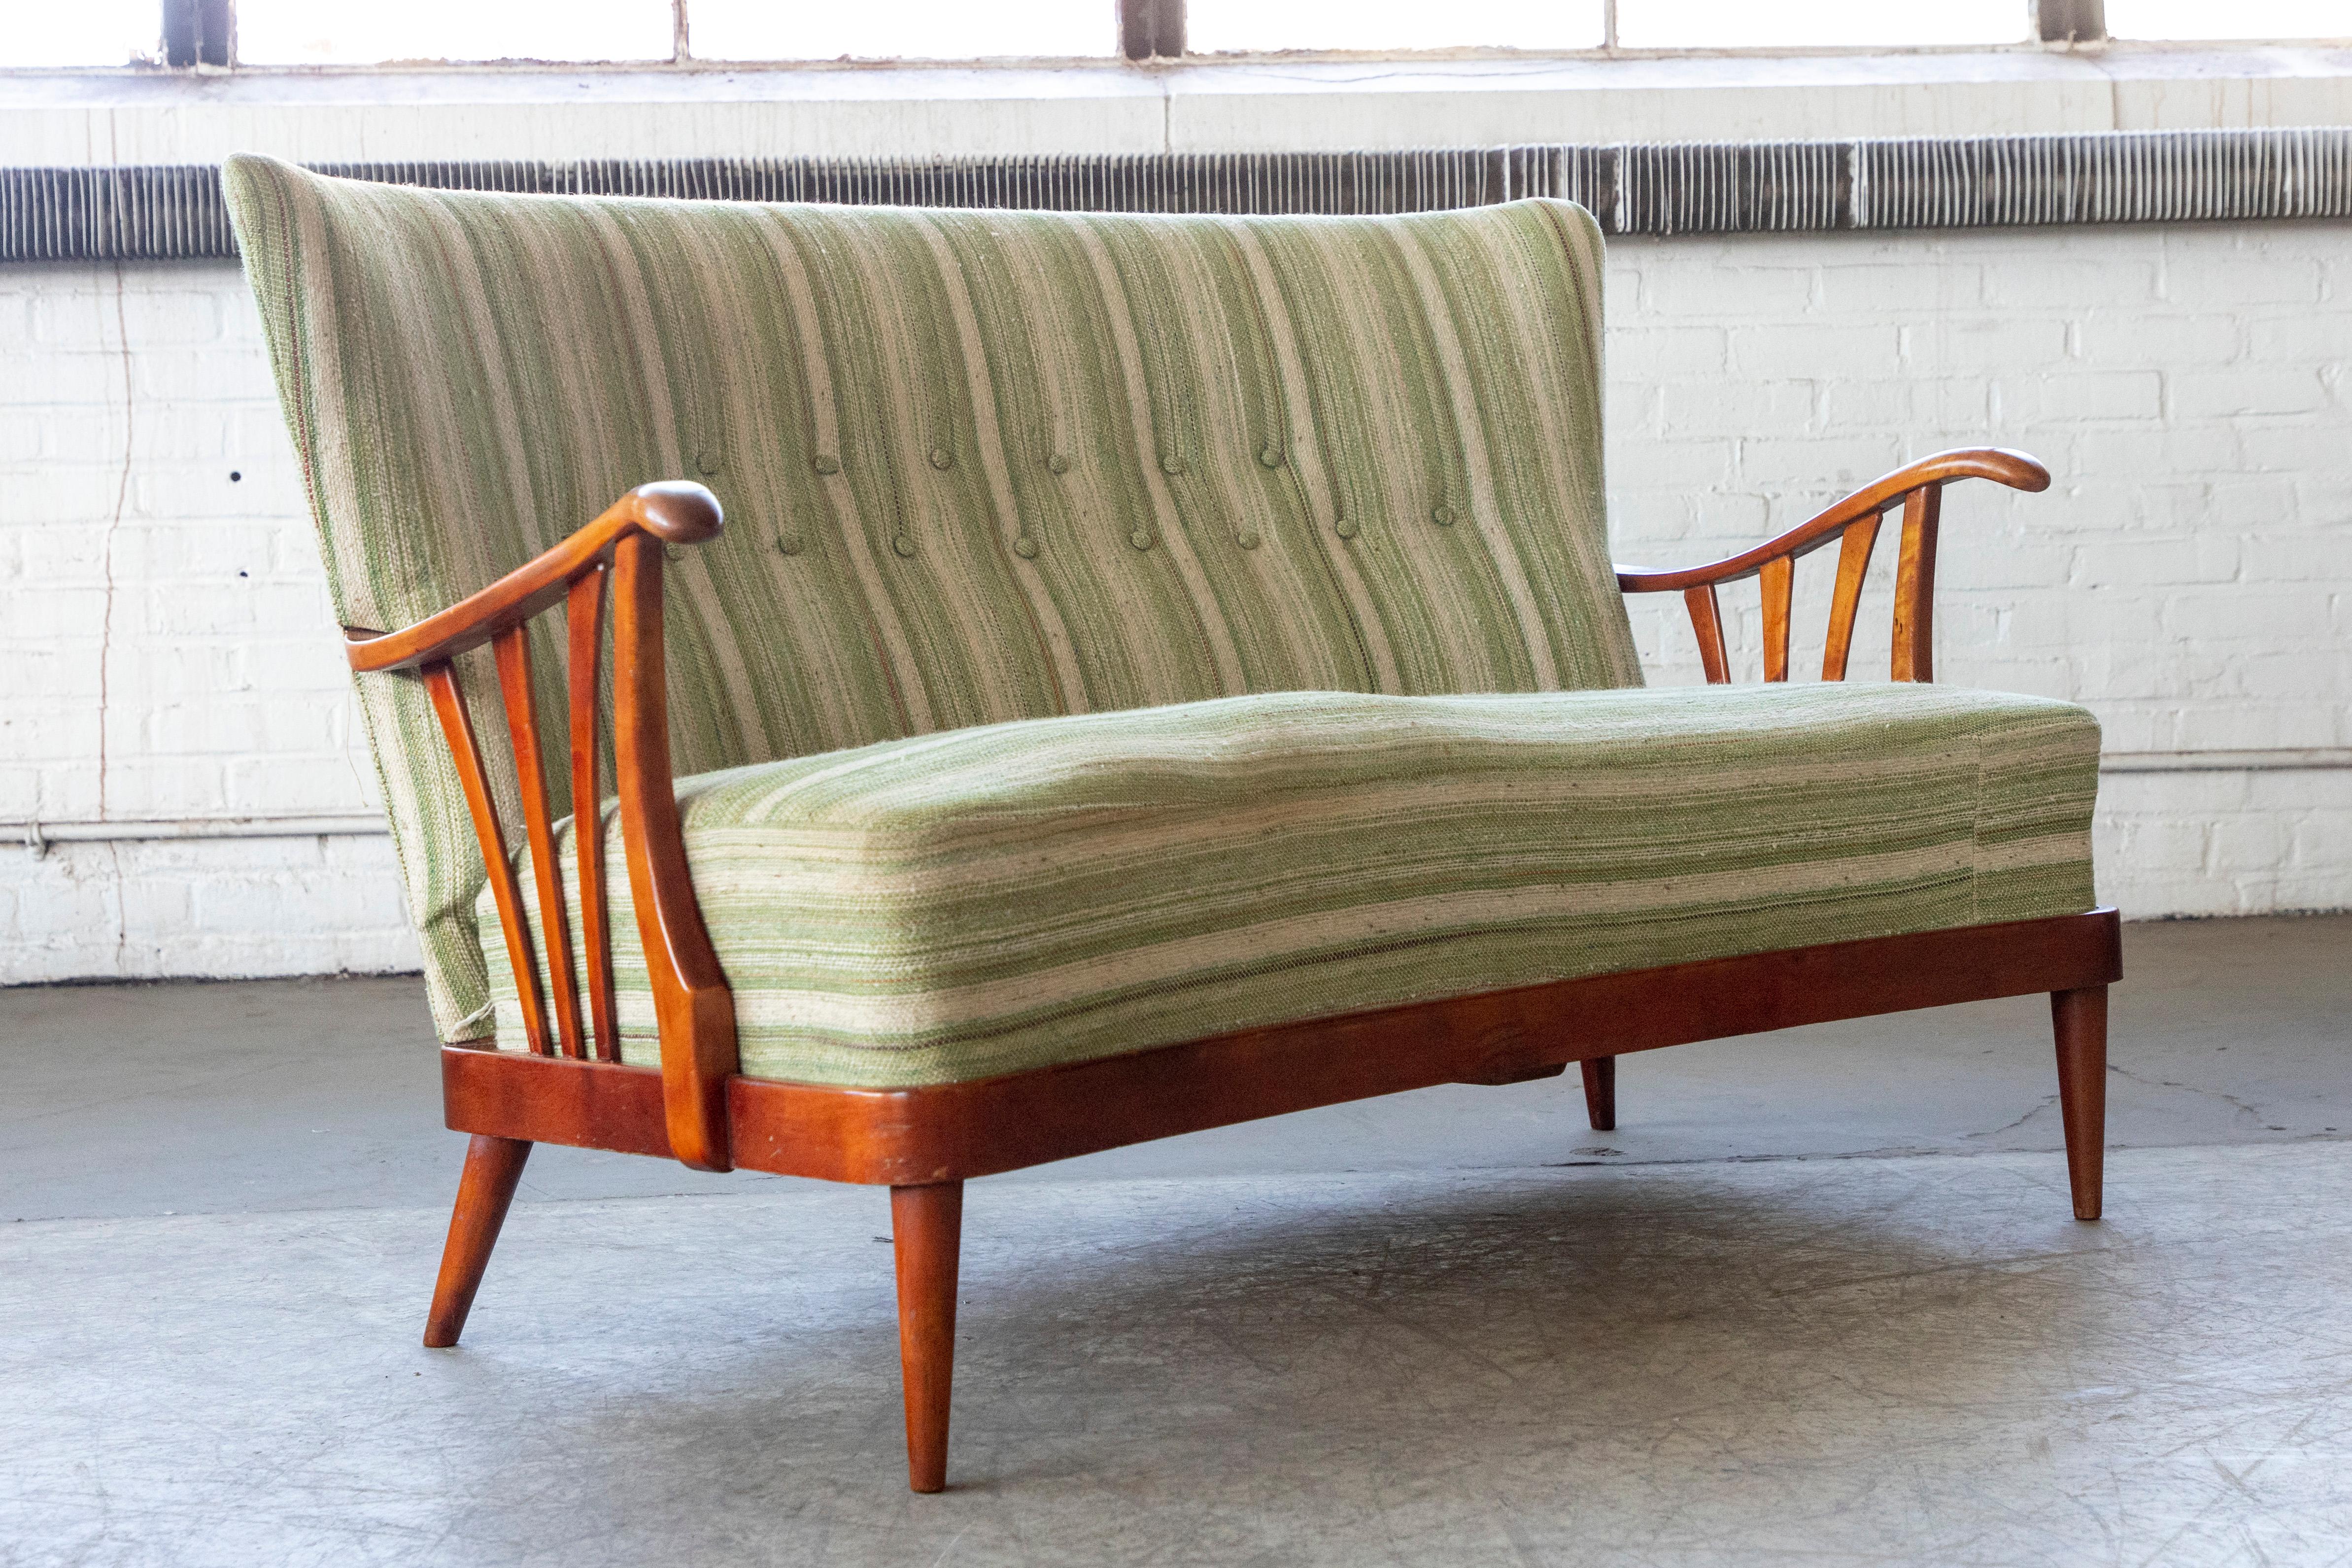 Very charming loveseat from the 1940's in the style of Alfred Christensen. Maker and Designer is unknown but the style is very similar to designs by Fritz Hansen and Alfred Christensen at the time. Spring loaded cushion and backrest. Reupholstered